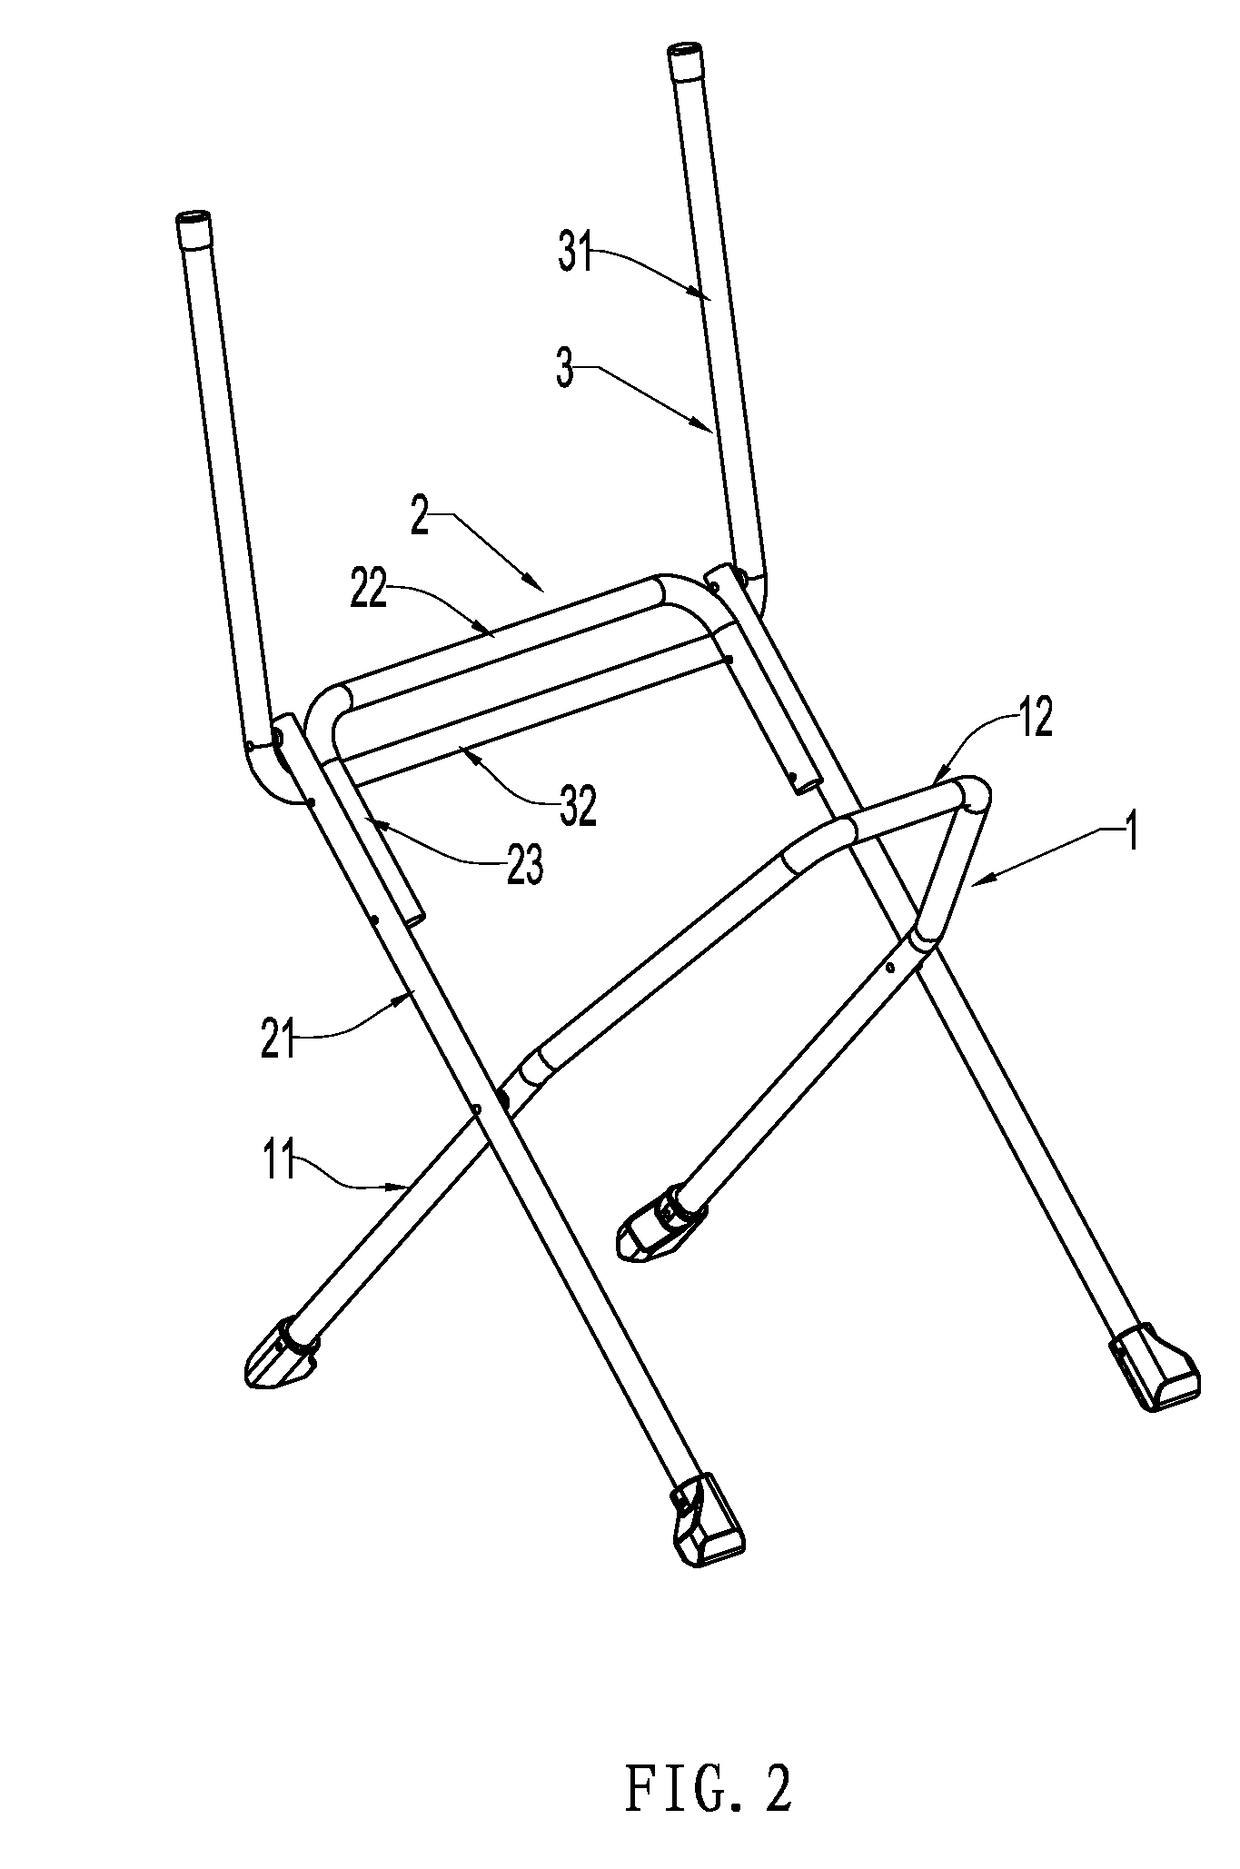 Folding chair with back rest